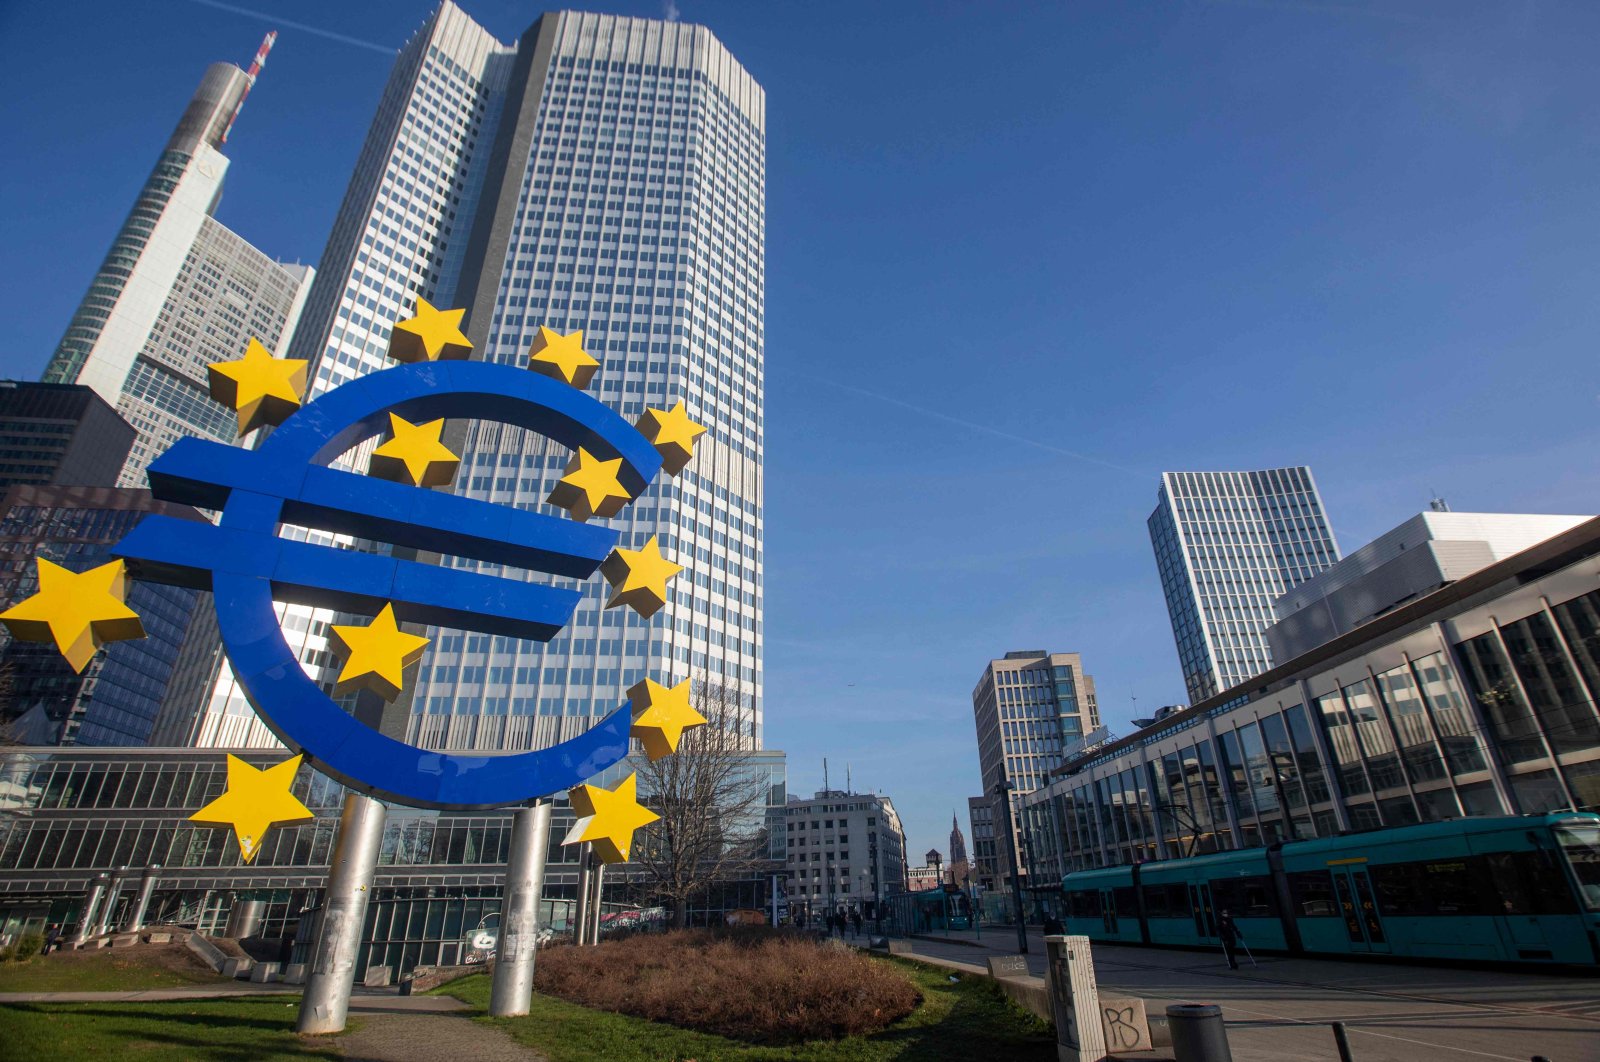 A sculpture depicting the euro currency symbol by German artist Ottmar Hِrl is seen in front of the former European Central Bank (ECB) headquarters building in Frankfurt am Main, western Germany, on Dec. 22, 2021. (AFP Photo)